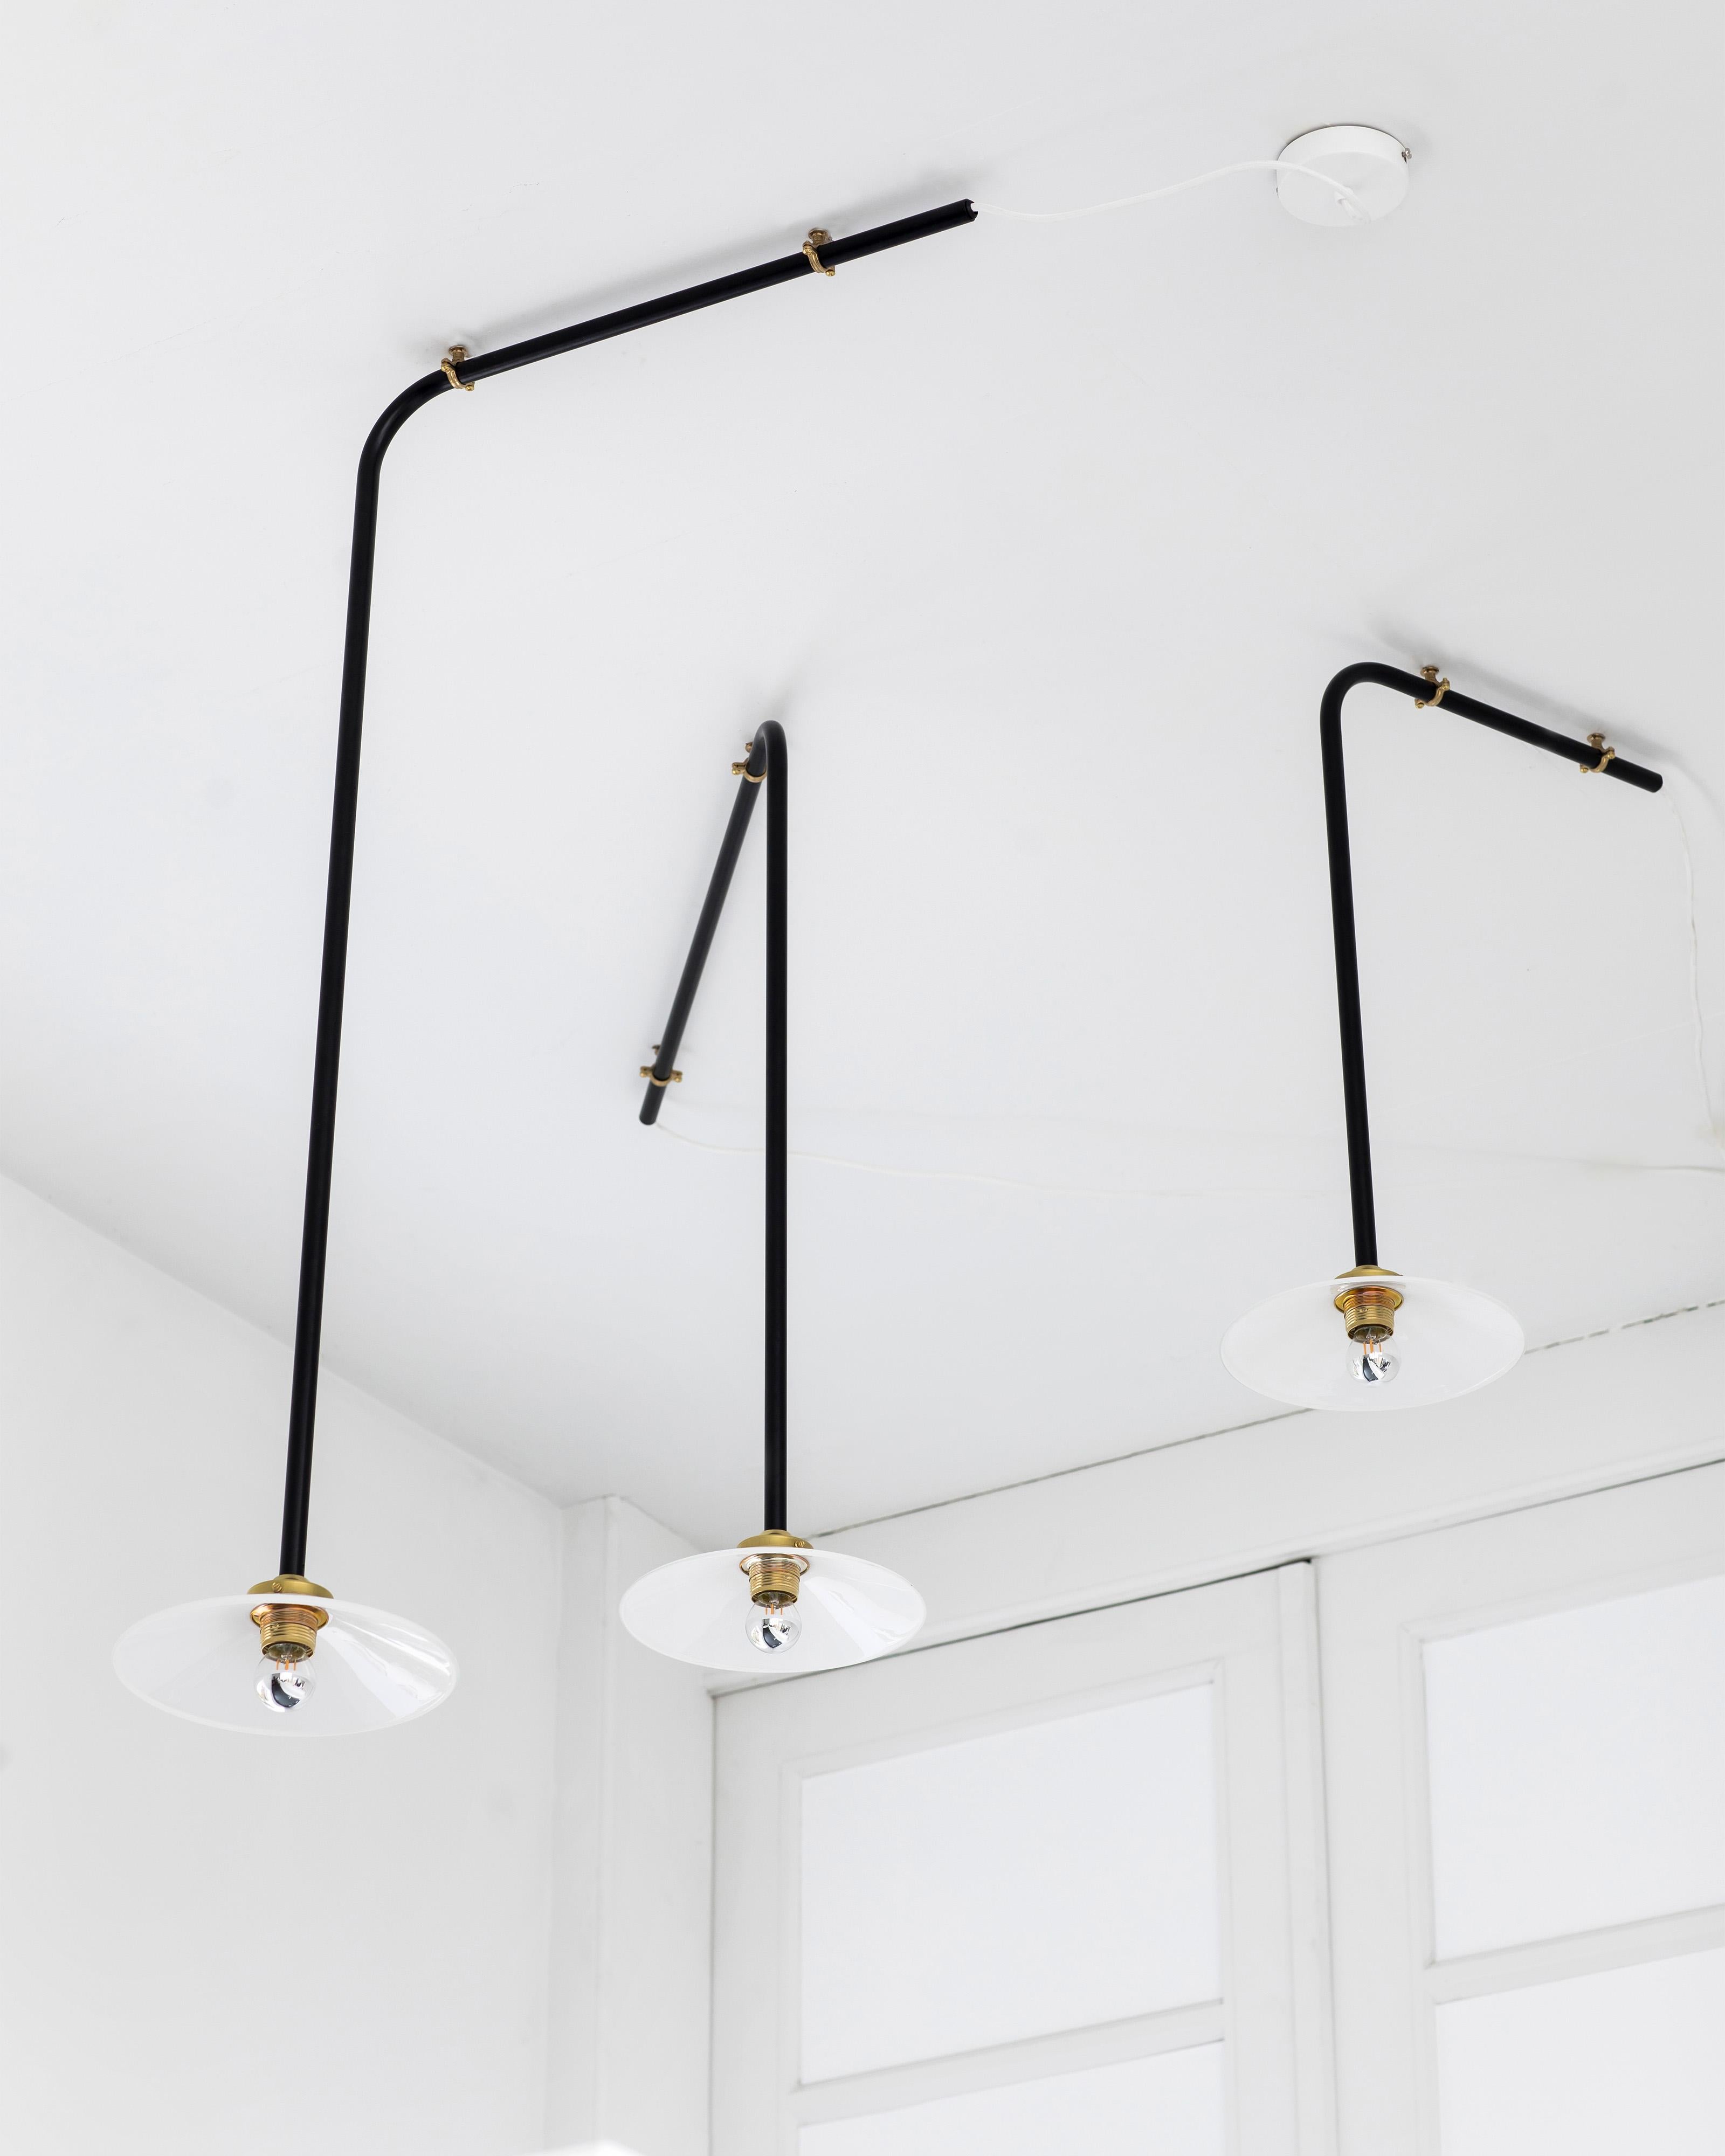 Cailing Lamp N°2 by Muller Van Severen x Valerie Objects

Dimensions: H. 118 X 67 X 25
Finish: Black

specifications
fitting type: e27
bulb replaceable: yes
number of fittings: 1
dimmable: no
cable length: 3 meter
switch: no

material: 
— lamp frame